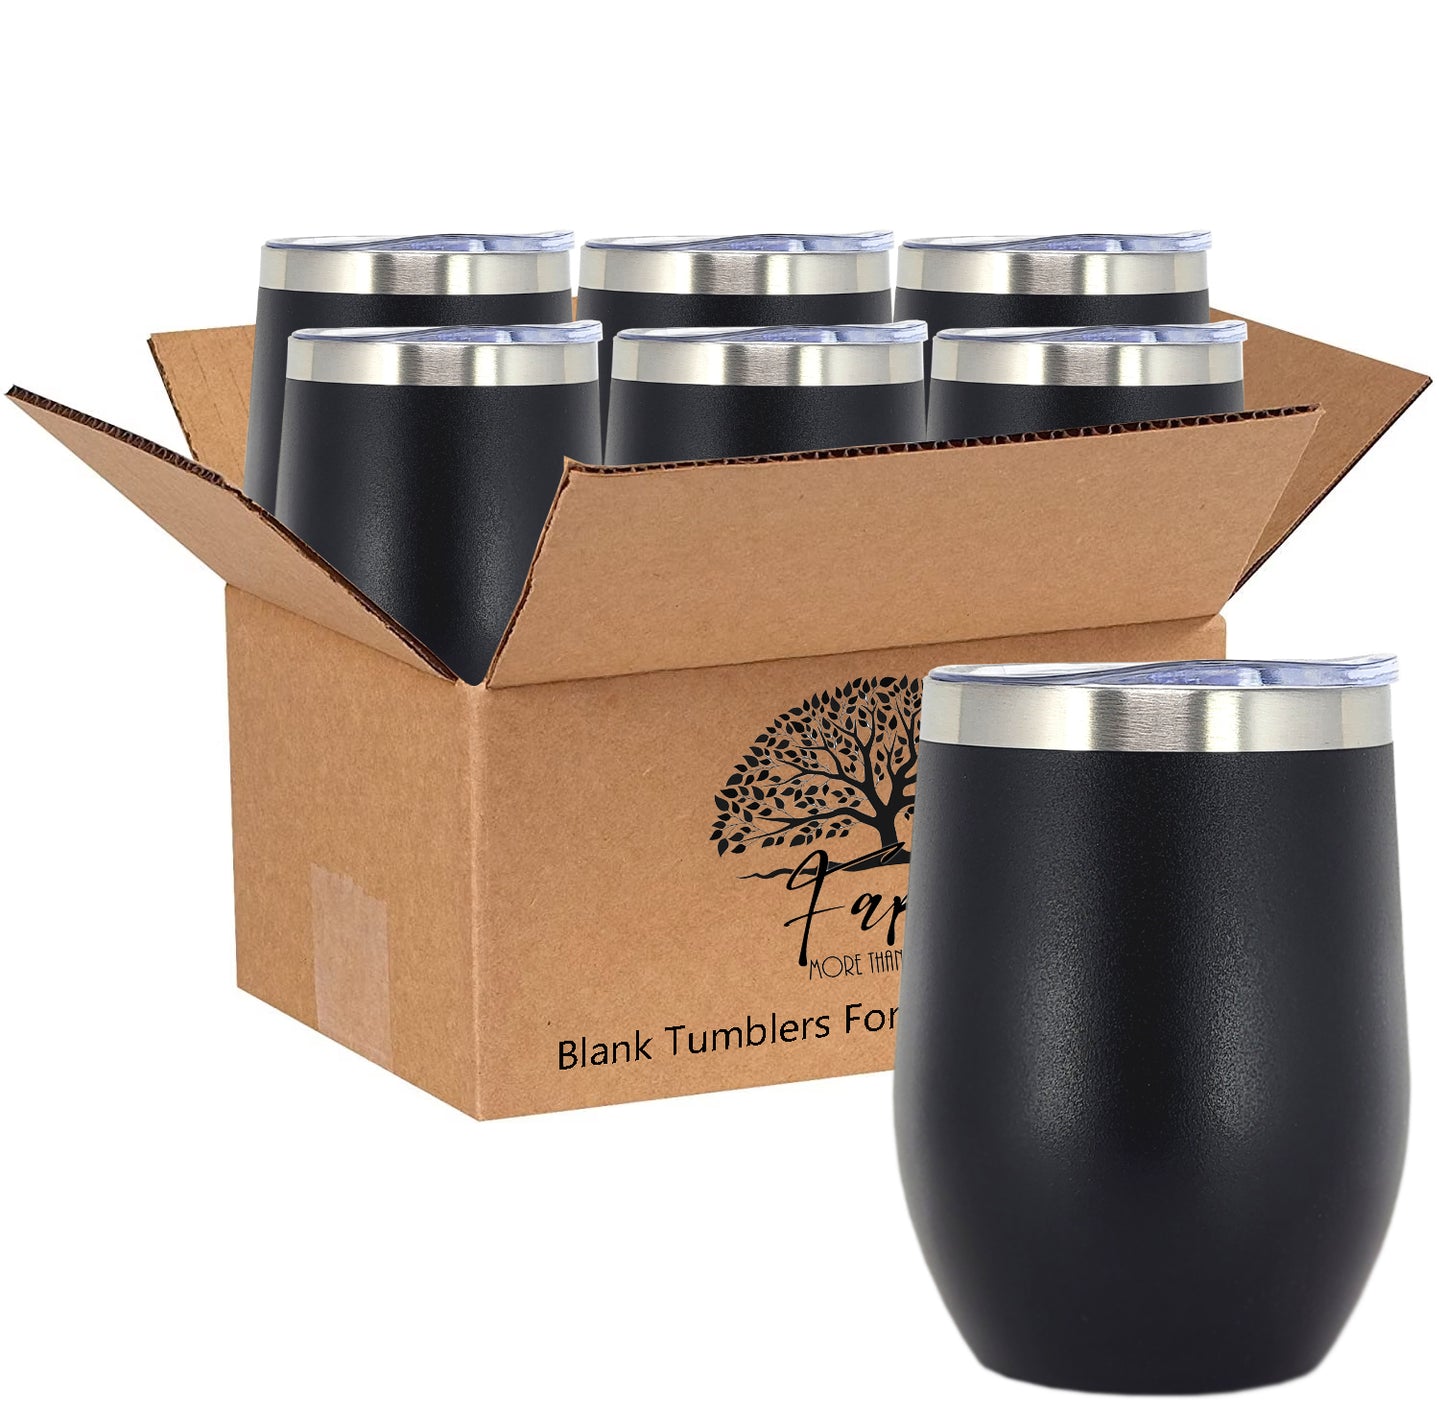 In BULK - Stainless Steel 12 Oz Wine Tumbler With Slider Block Lid -Powder Coating- 304 Stainless Steel Double Wall Insulated (6 Pack)